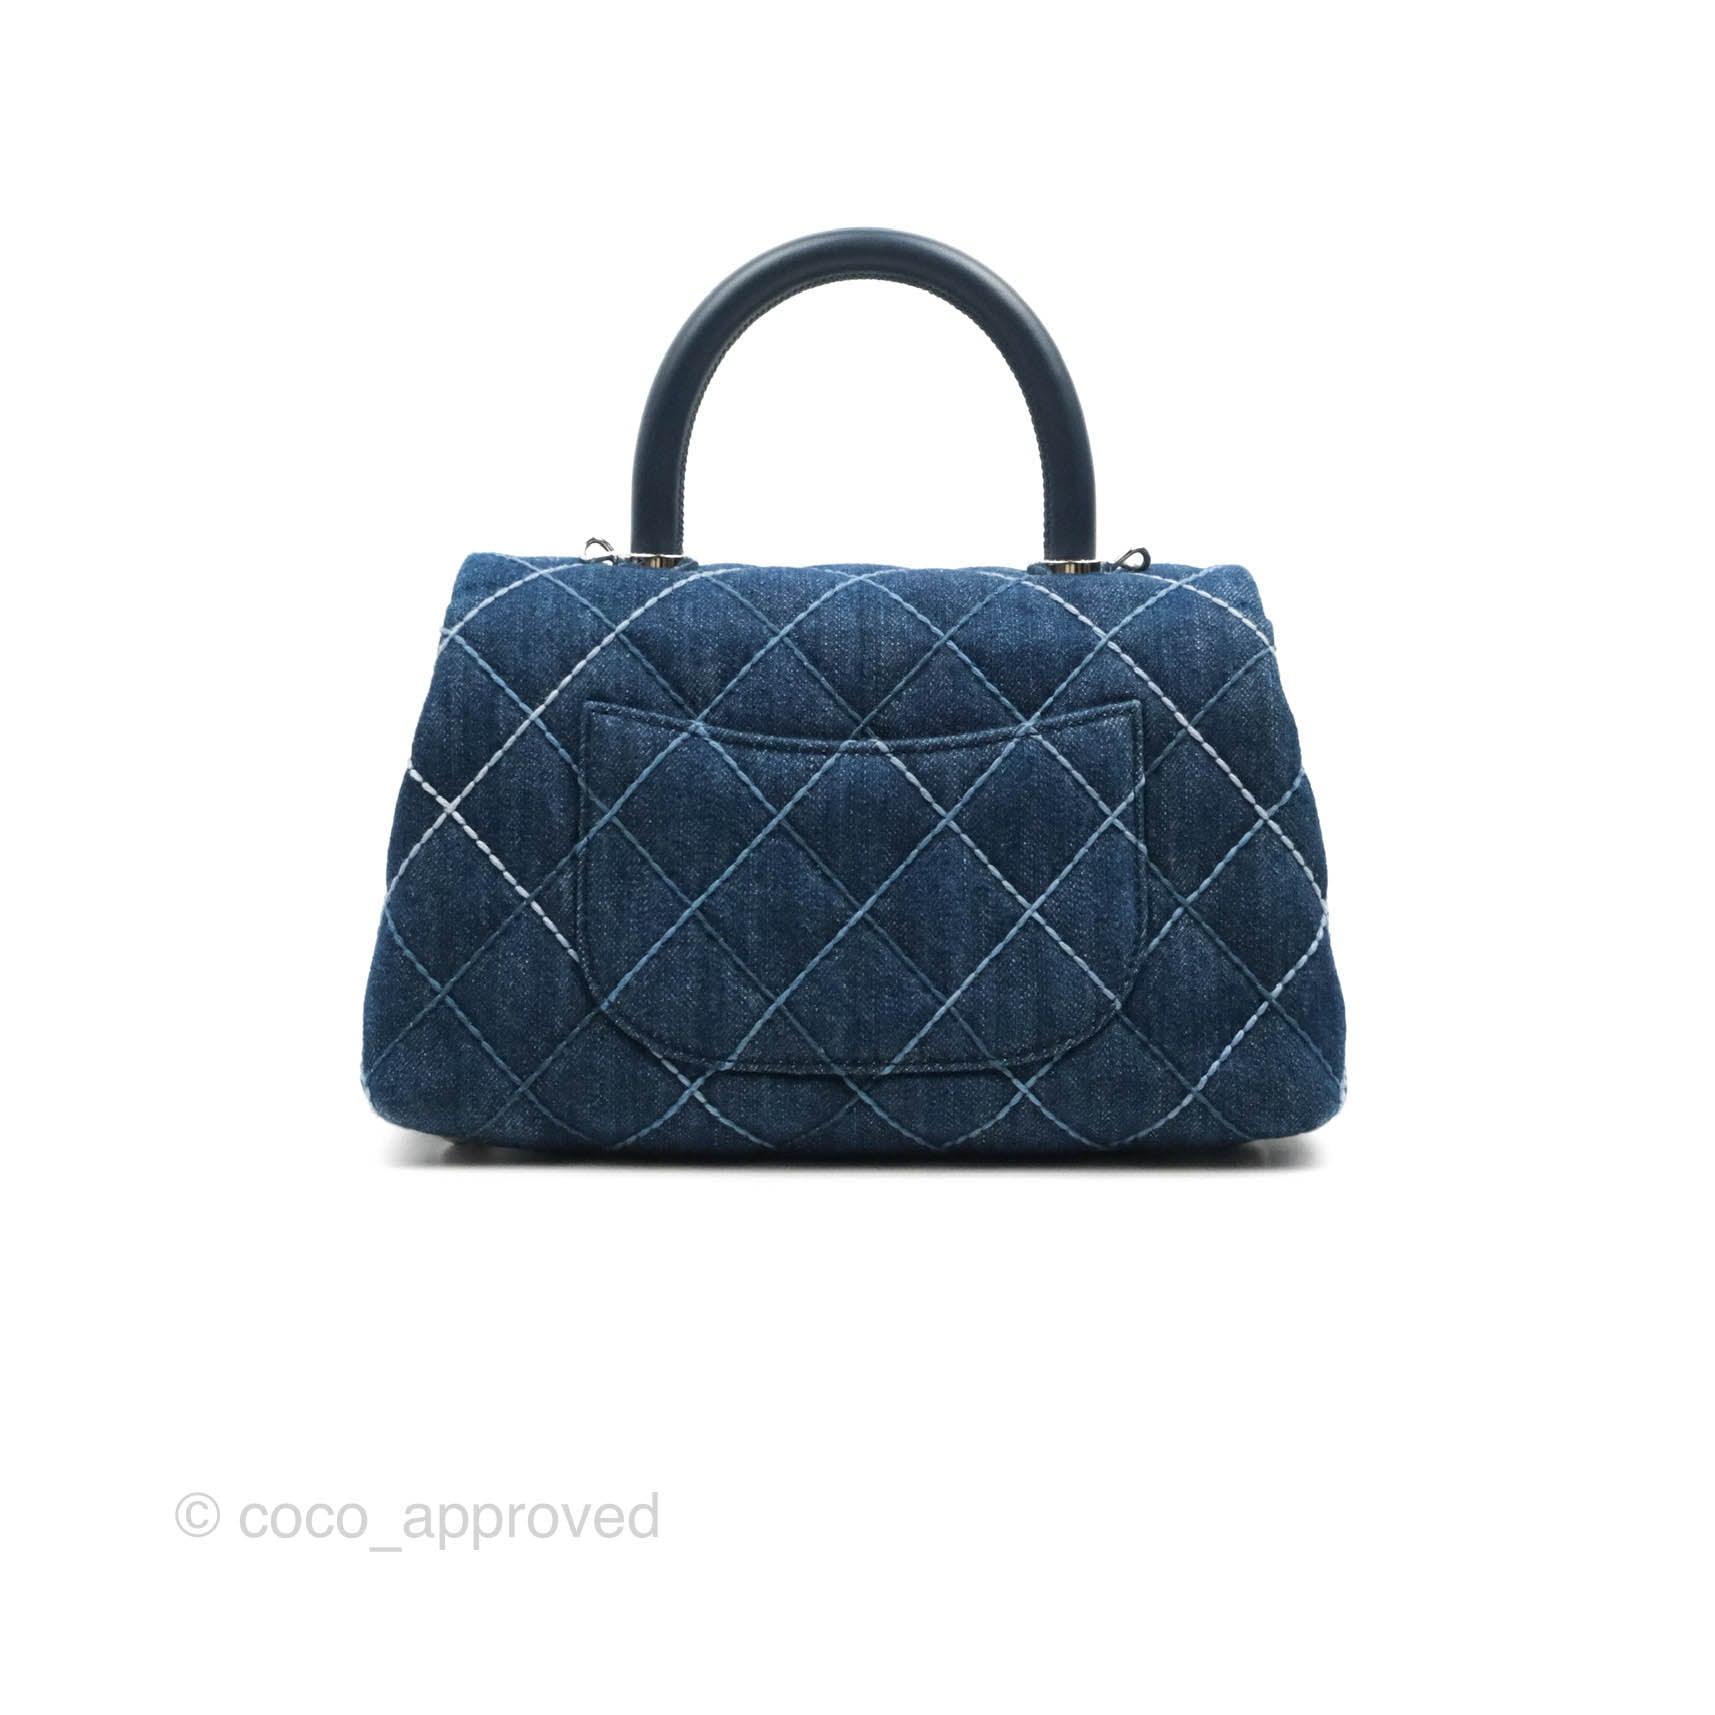 Chanel Large Denim Deauville Tote Bag Navy Silver Tone – Coco Approved  Studio